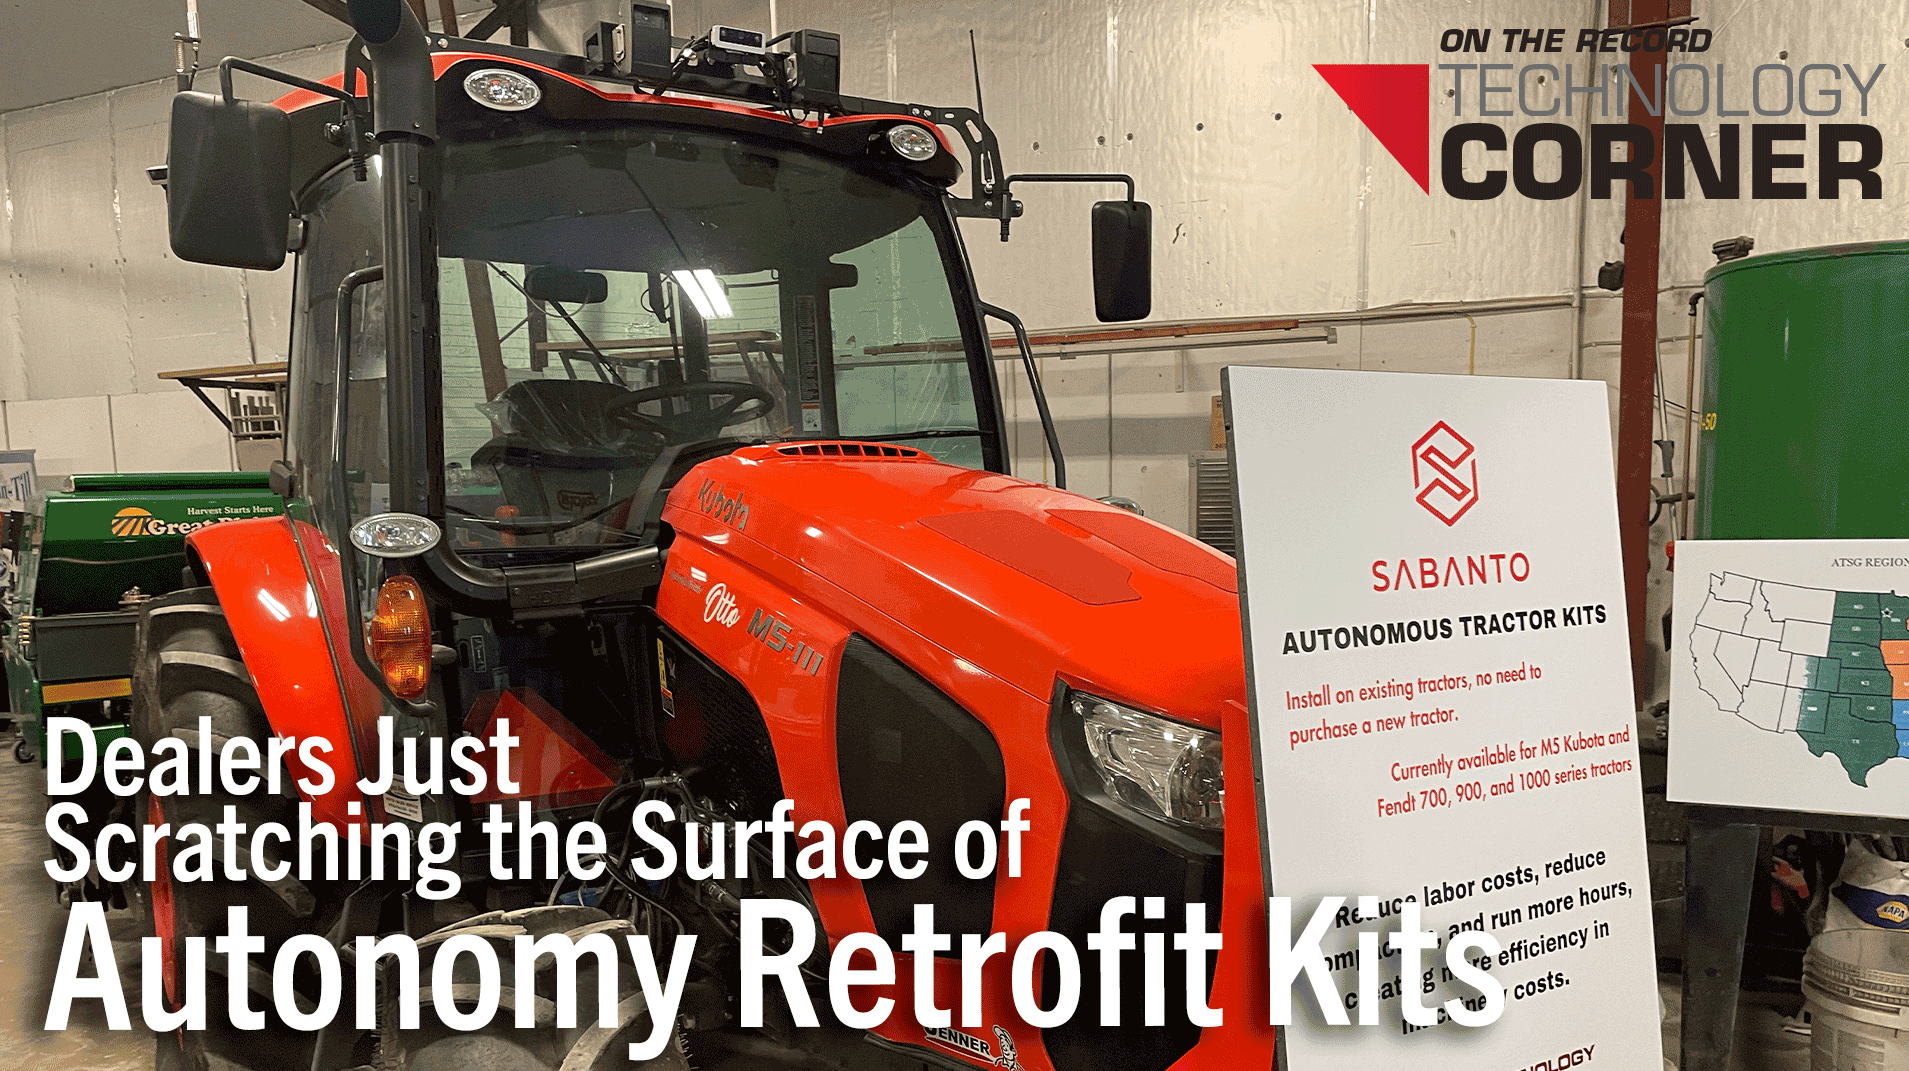 Exploring the Potential of Autonomy Retrofit Kits in the Technology Corner